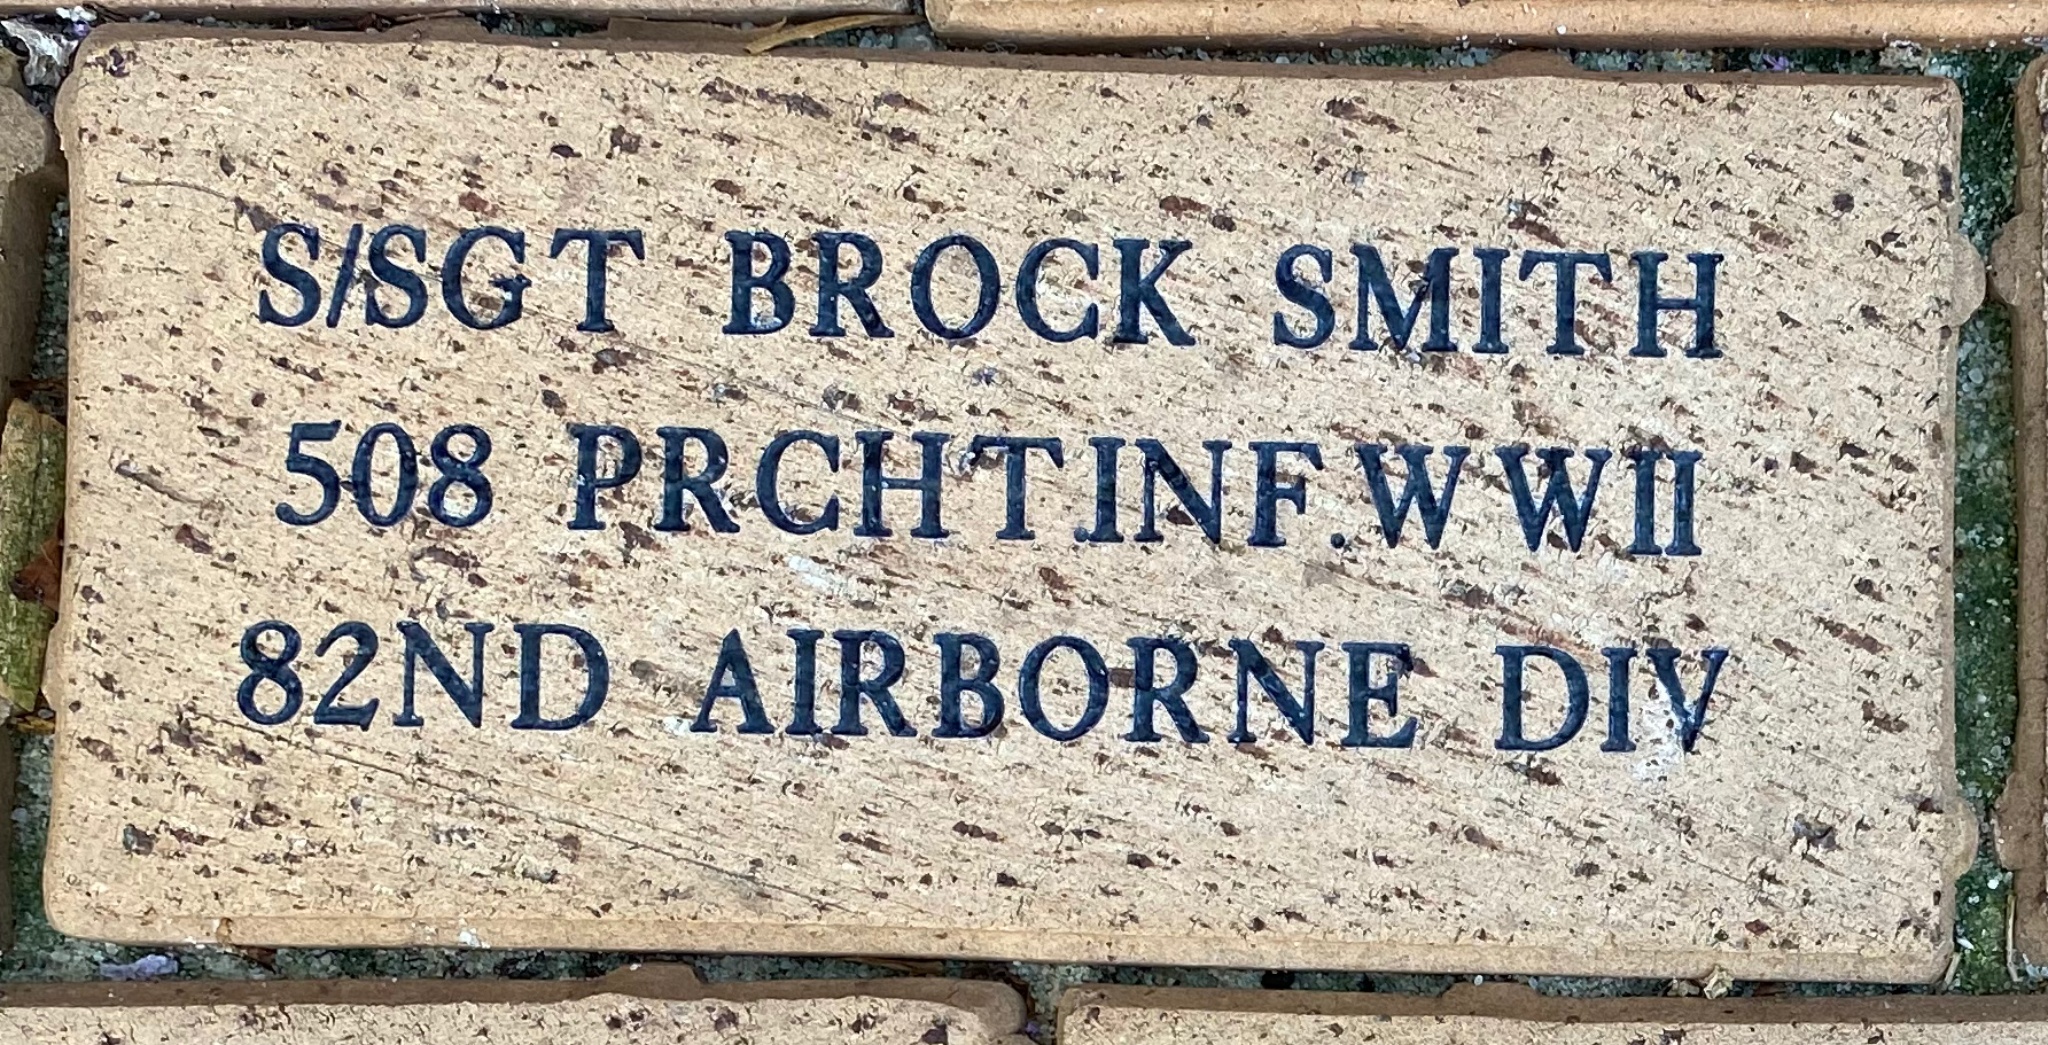 S/SGT BROCK SMITH 508 PRCHT.INF. WWII 82ND AIRBORNE DIV